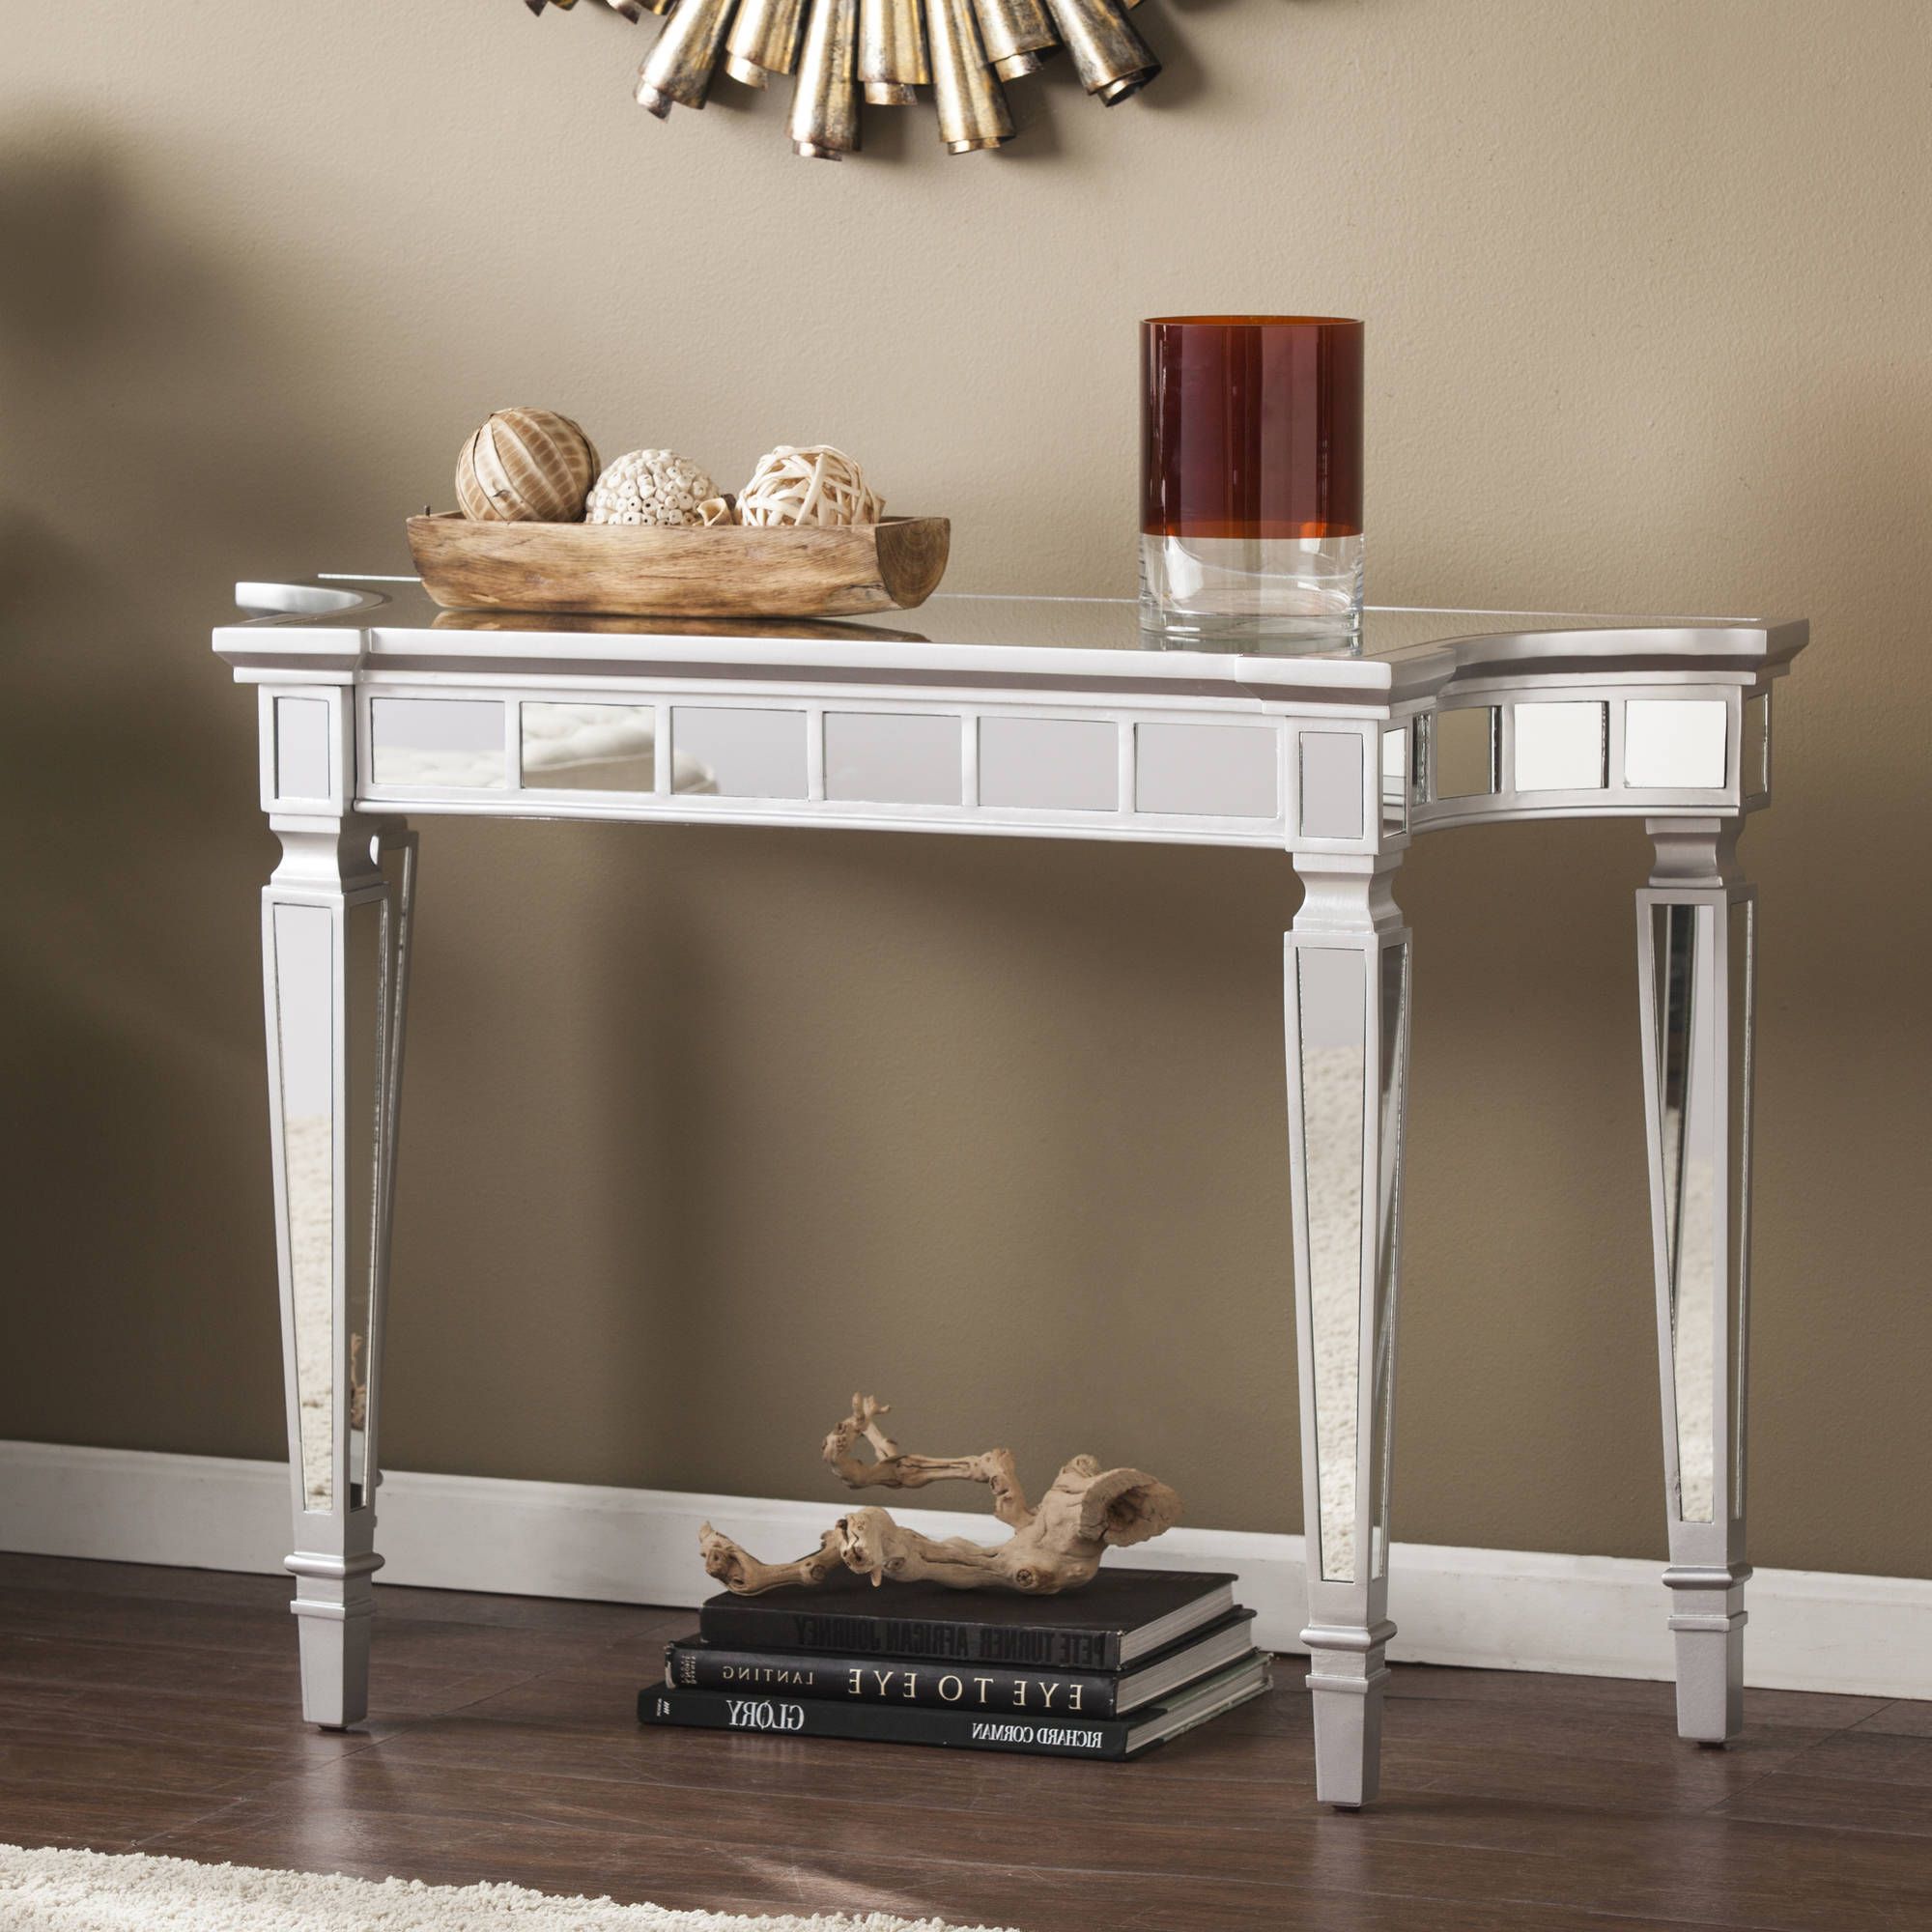 Grevale Glam Mirrored Console Table, Matte Silverember Throughout Popular Mirrored And Silver Cocktail Tables (View 4 of 20)